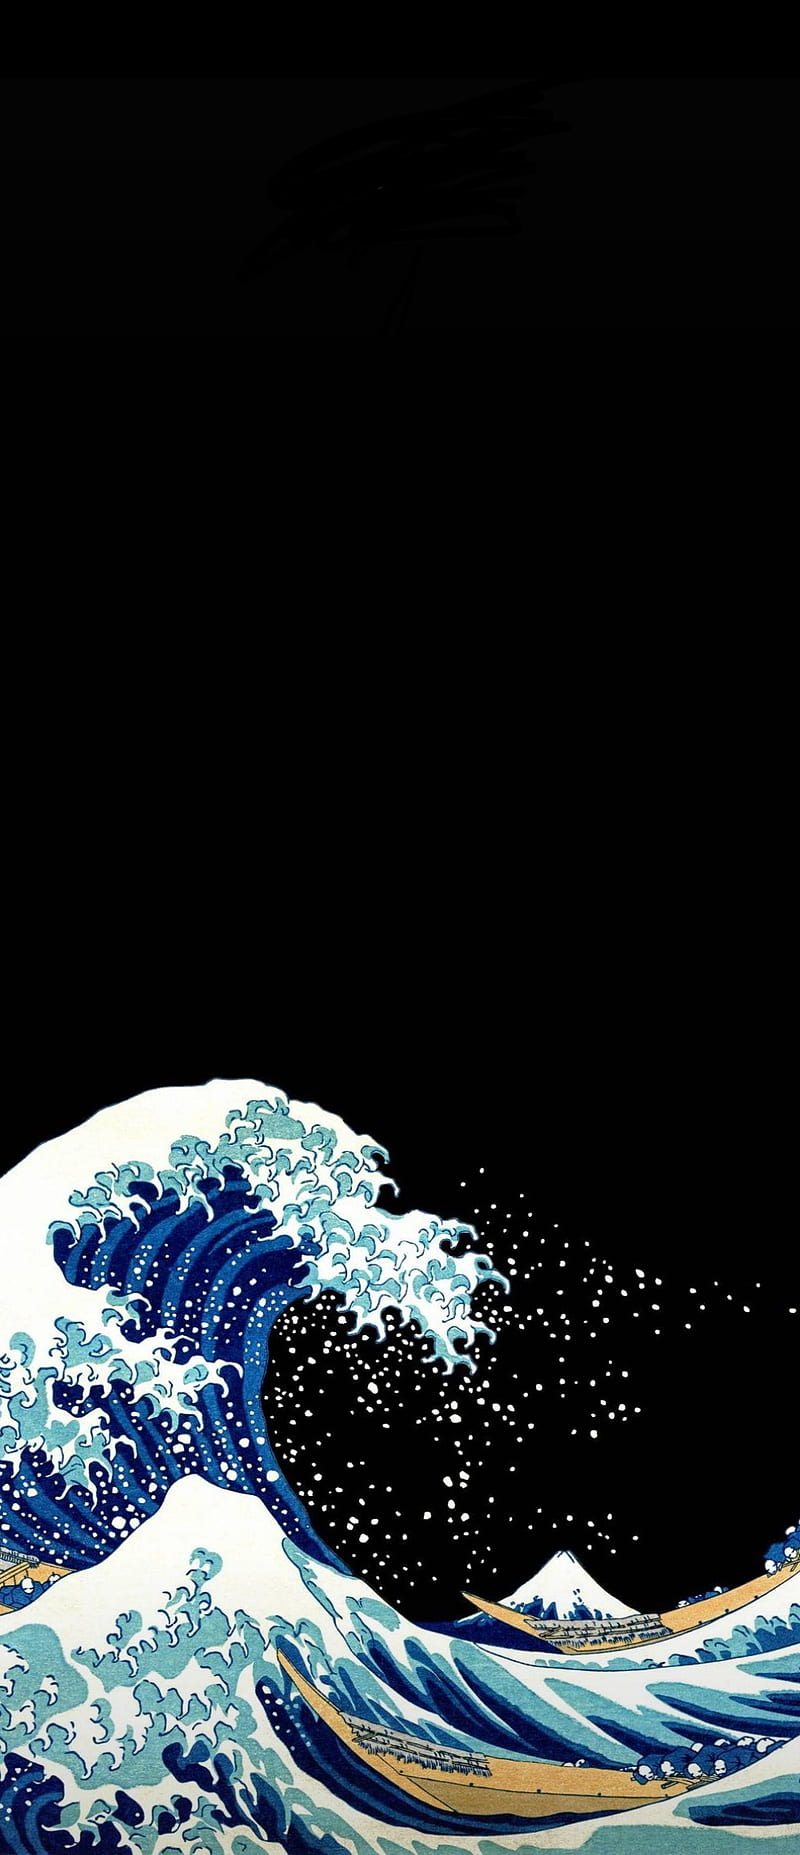 Download A Black Background With A White Wave On It Wallpaper  Wallpapers com